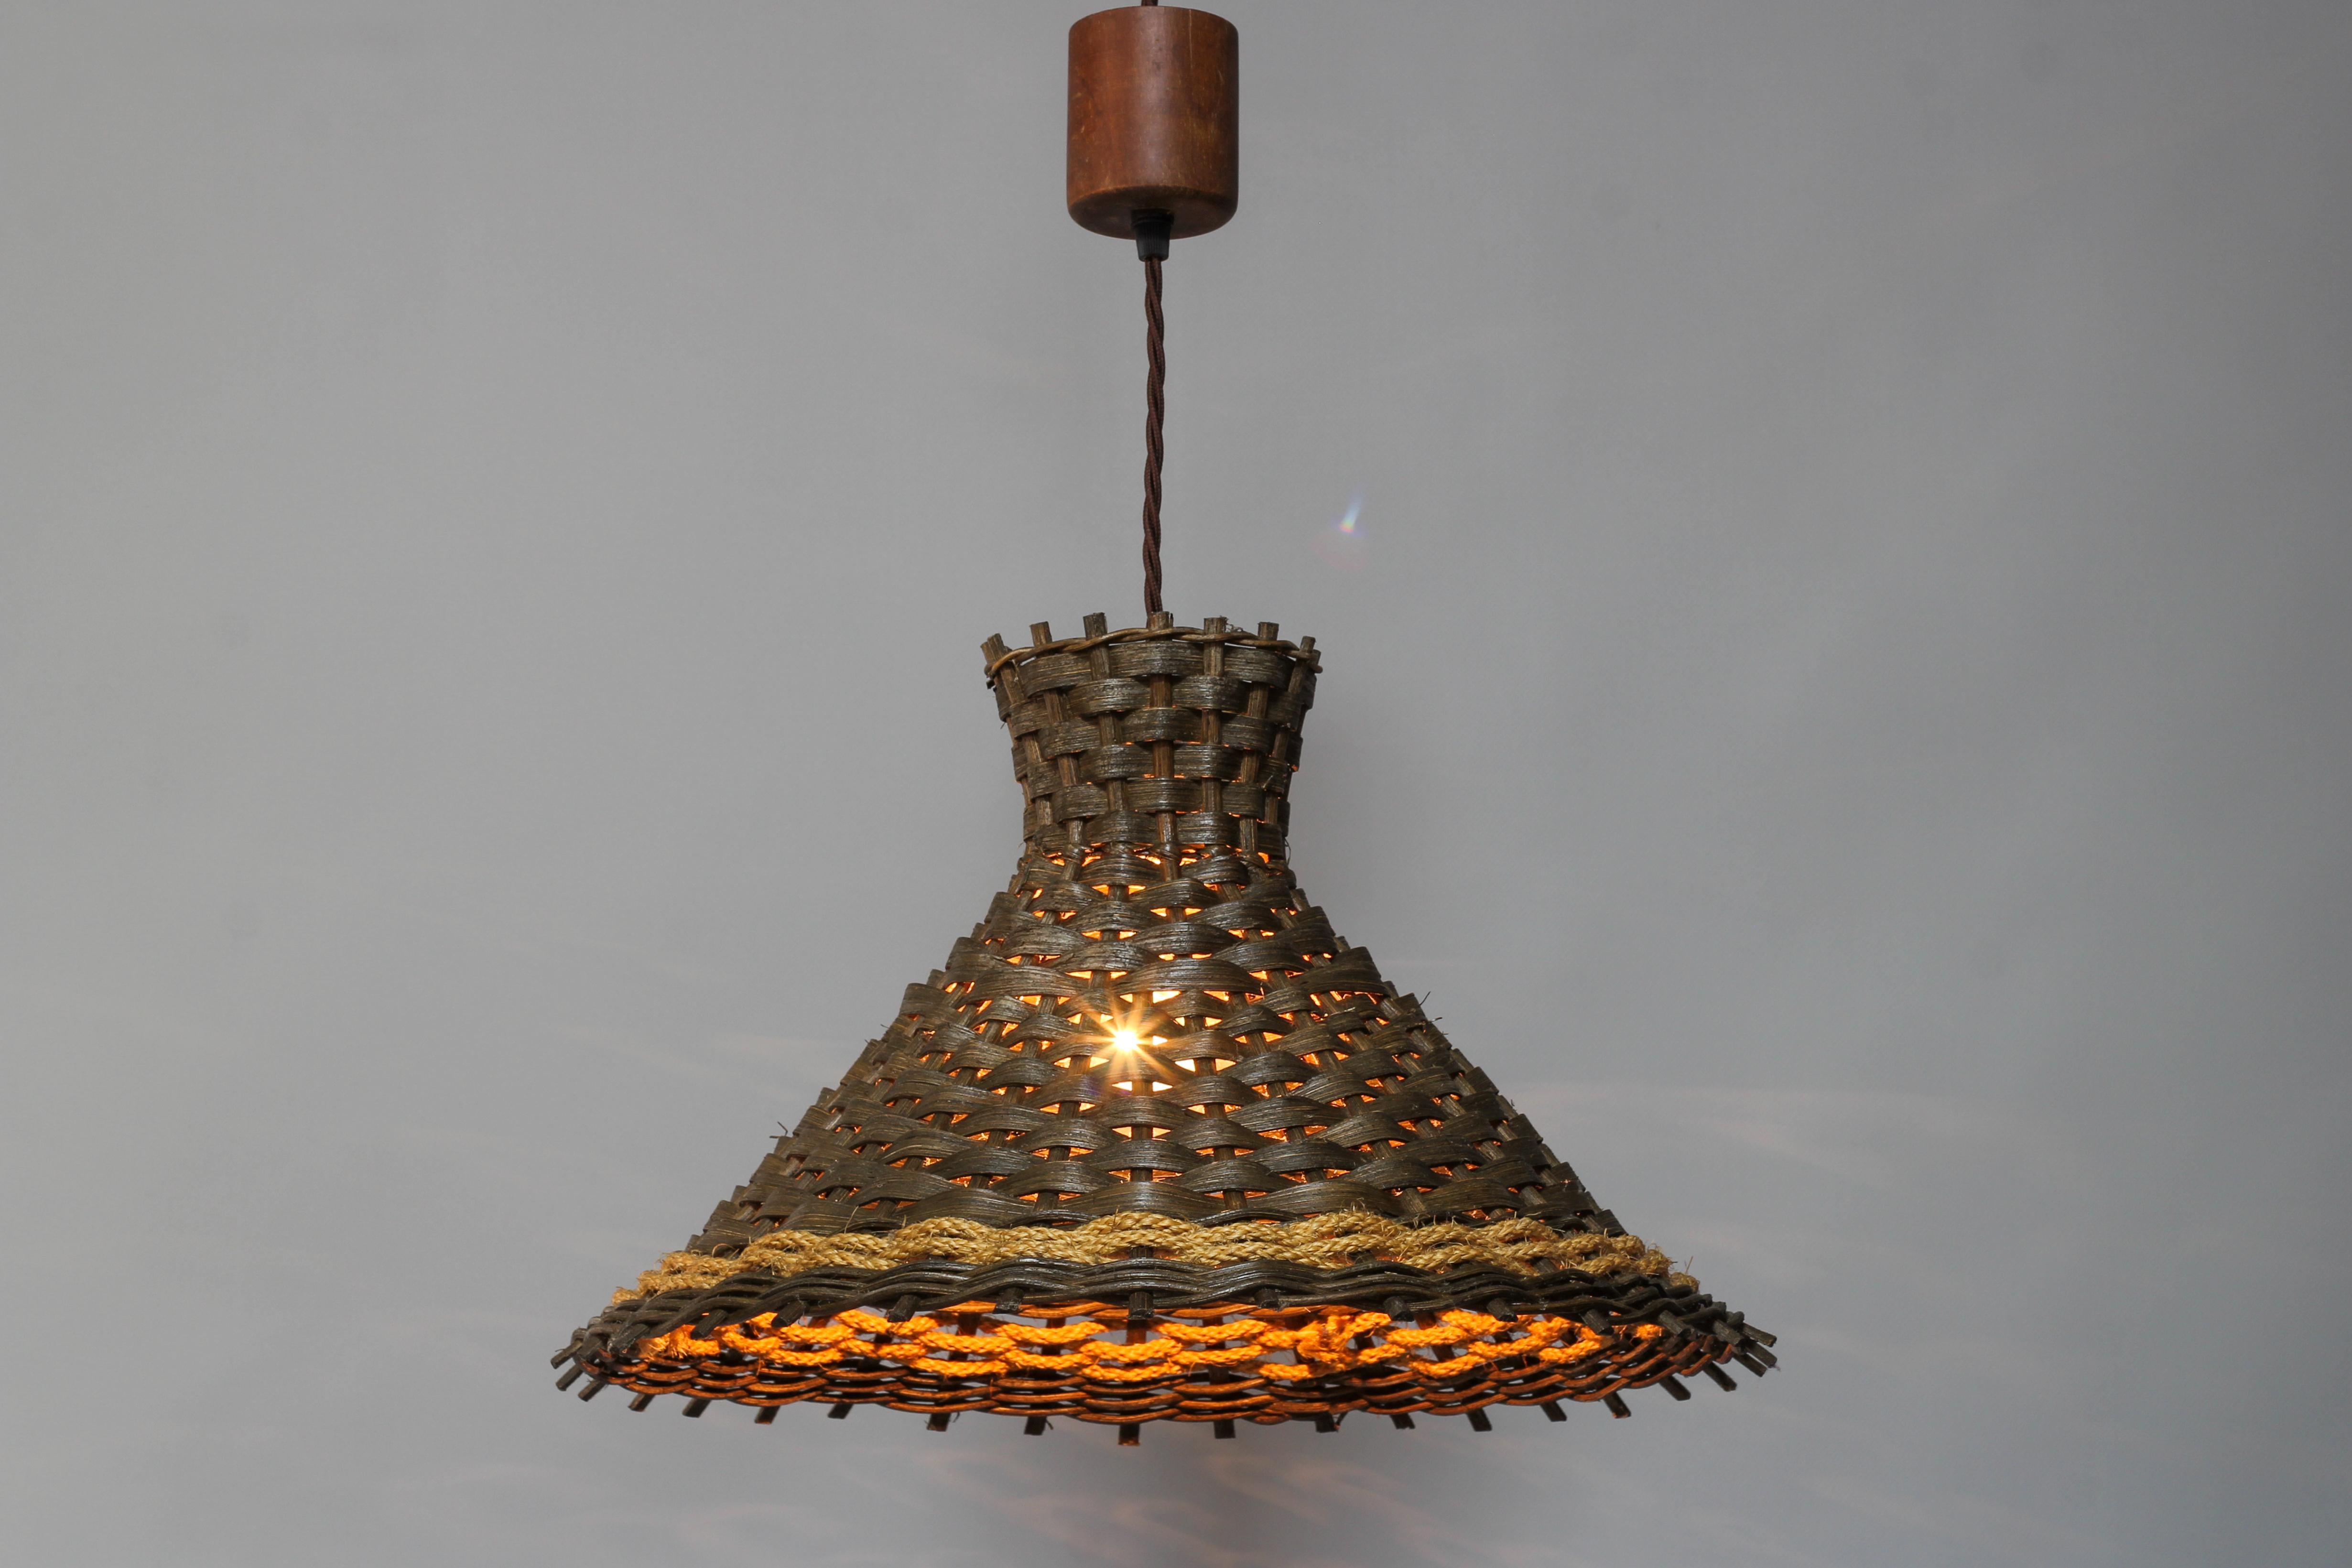 Adorable vintage, Mid-Century Modern wooden pendant lamp, Germany, the 1970s. Dark brown wooden lampshade adorned with a yellow accent - a braided rope. Wooden canopy.
One new socket for E27 (E26) size light bulb.
Dimensions: height: adjustable from